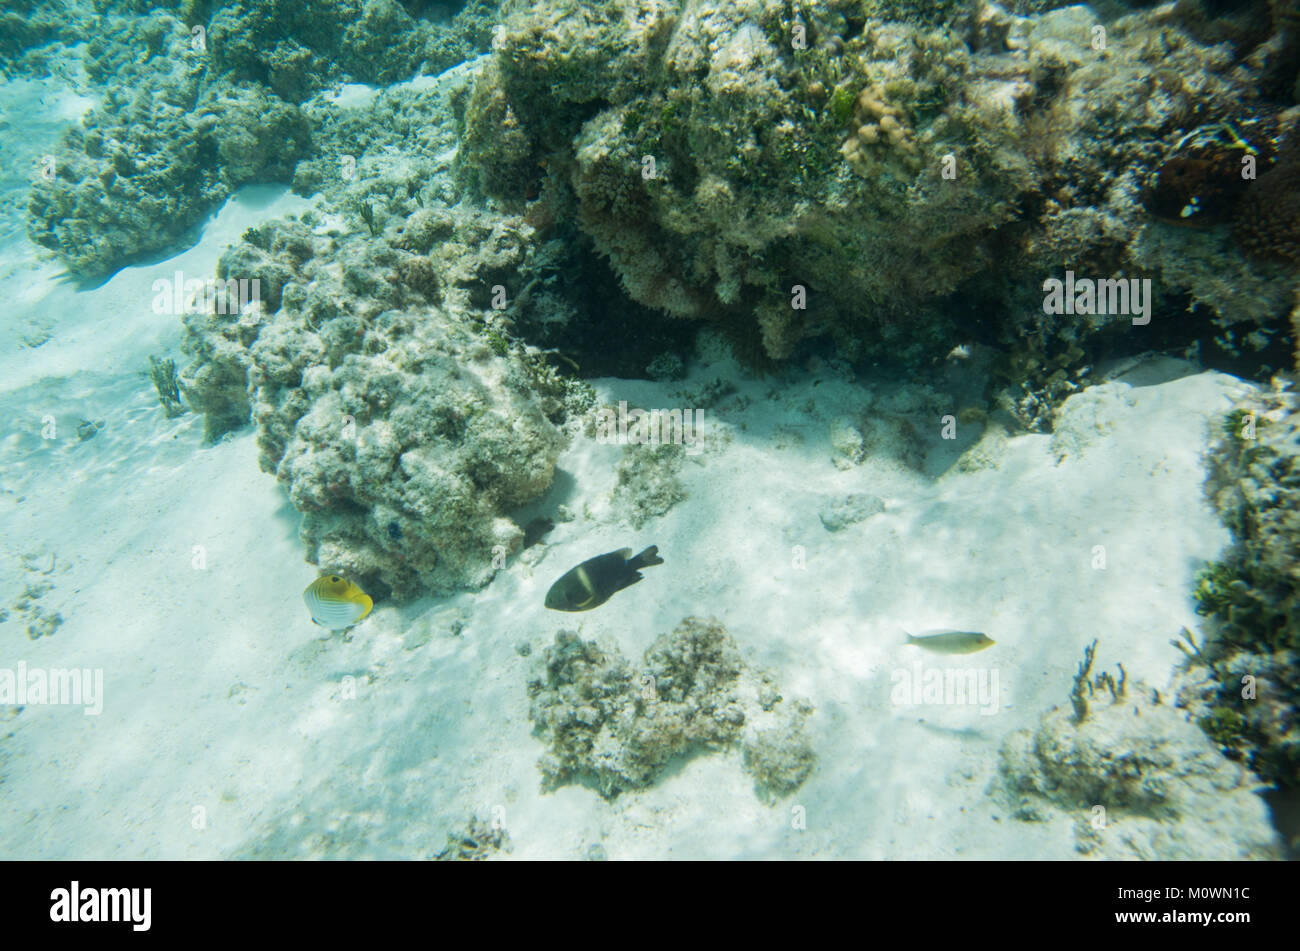 Threadfin butterflyfish and other tropical fish in the shallow coral reef off the shoreline of Yejele Beach in Tadine, Mare, New Caledonia Stock Photo